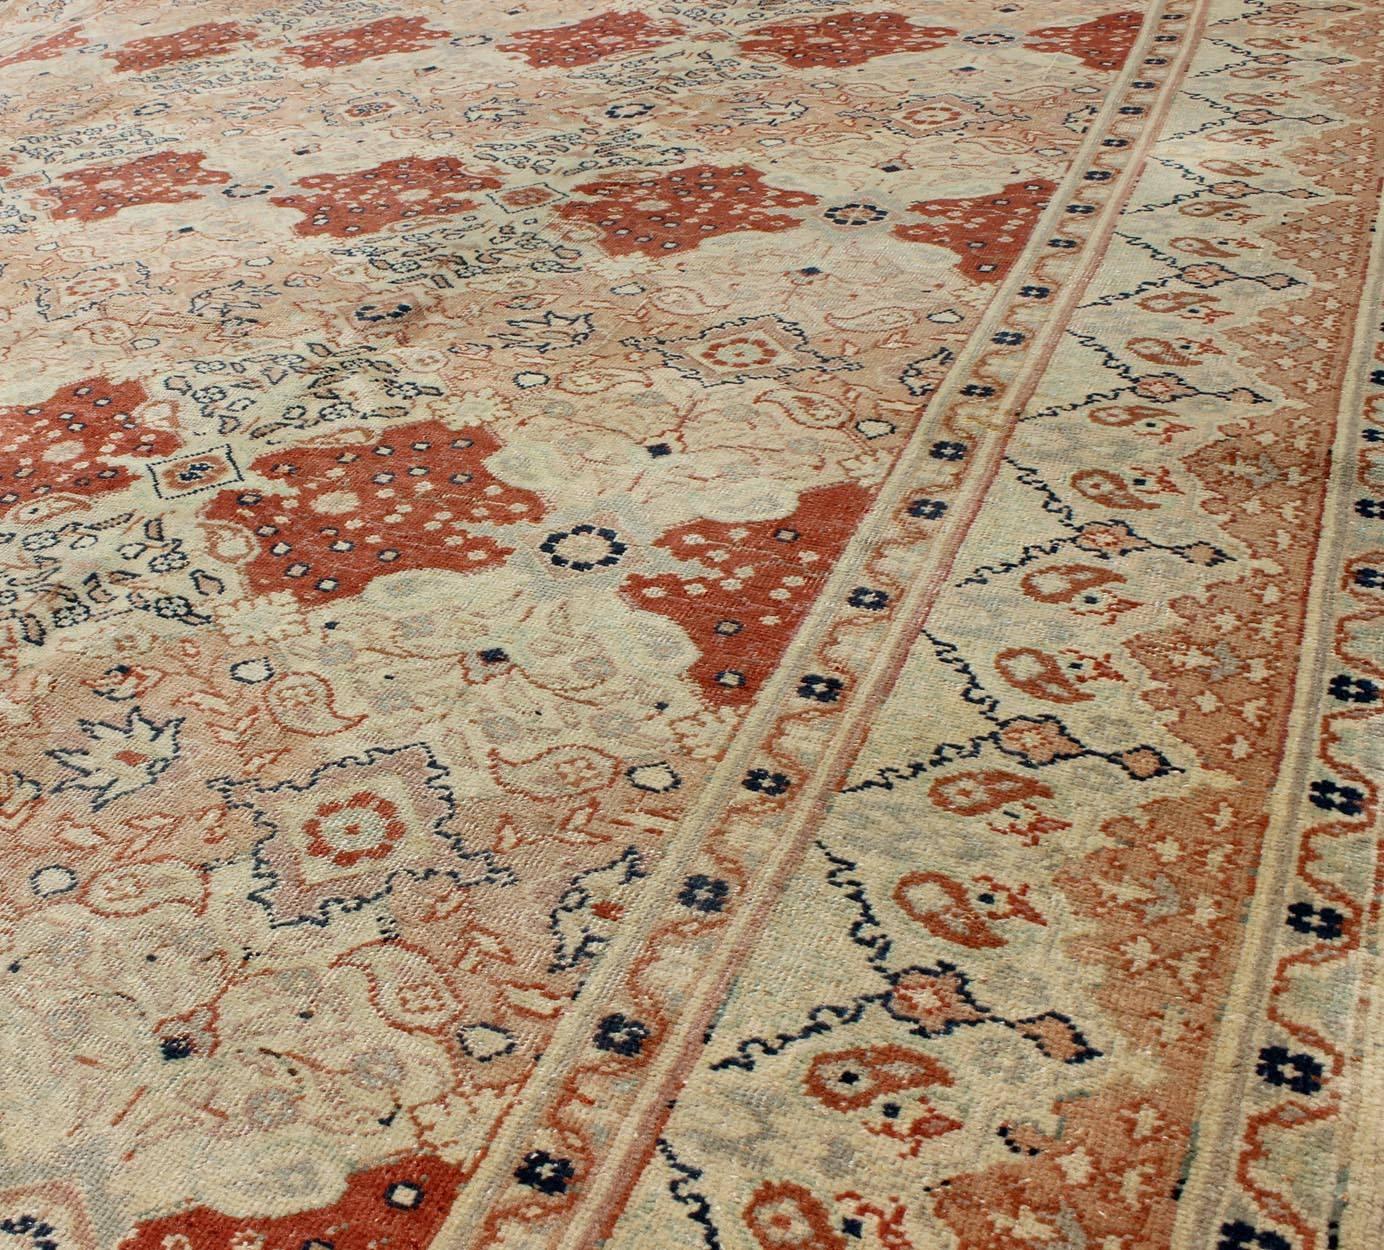 Hand-Knotted Fine Turkish Sivas Rug in Rust, Salmon, Cream and Navy Blue Outlines